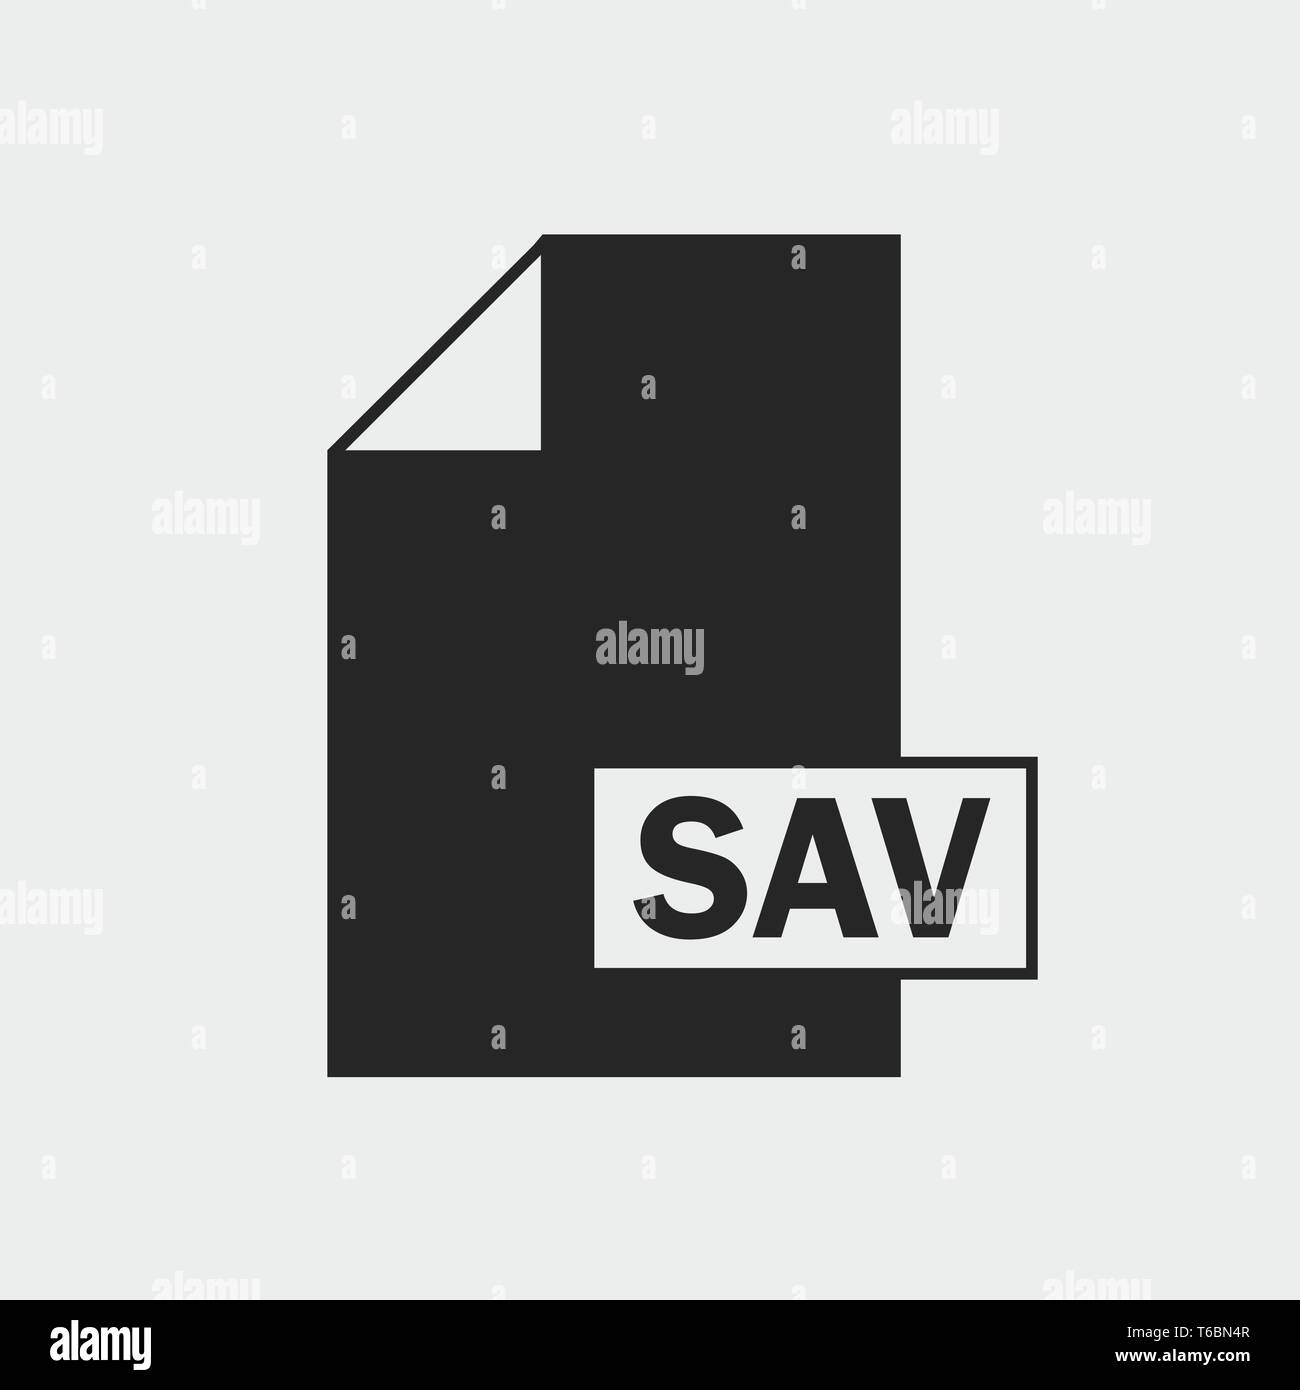 SAV File format icon on gray background Stock Vector